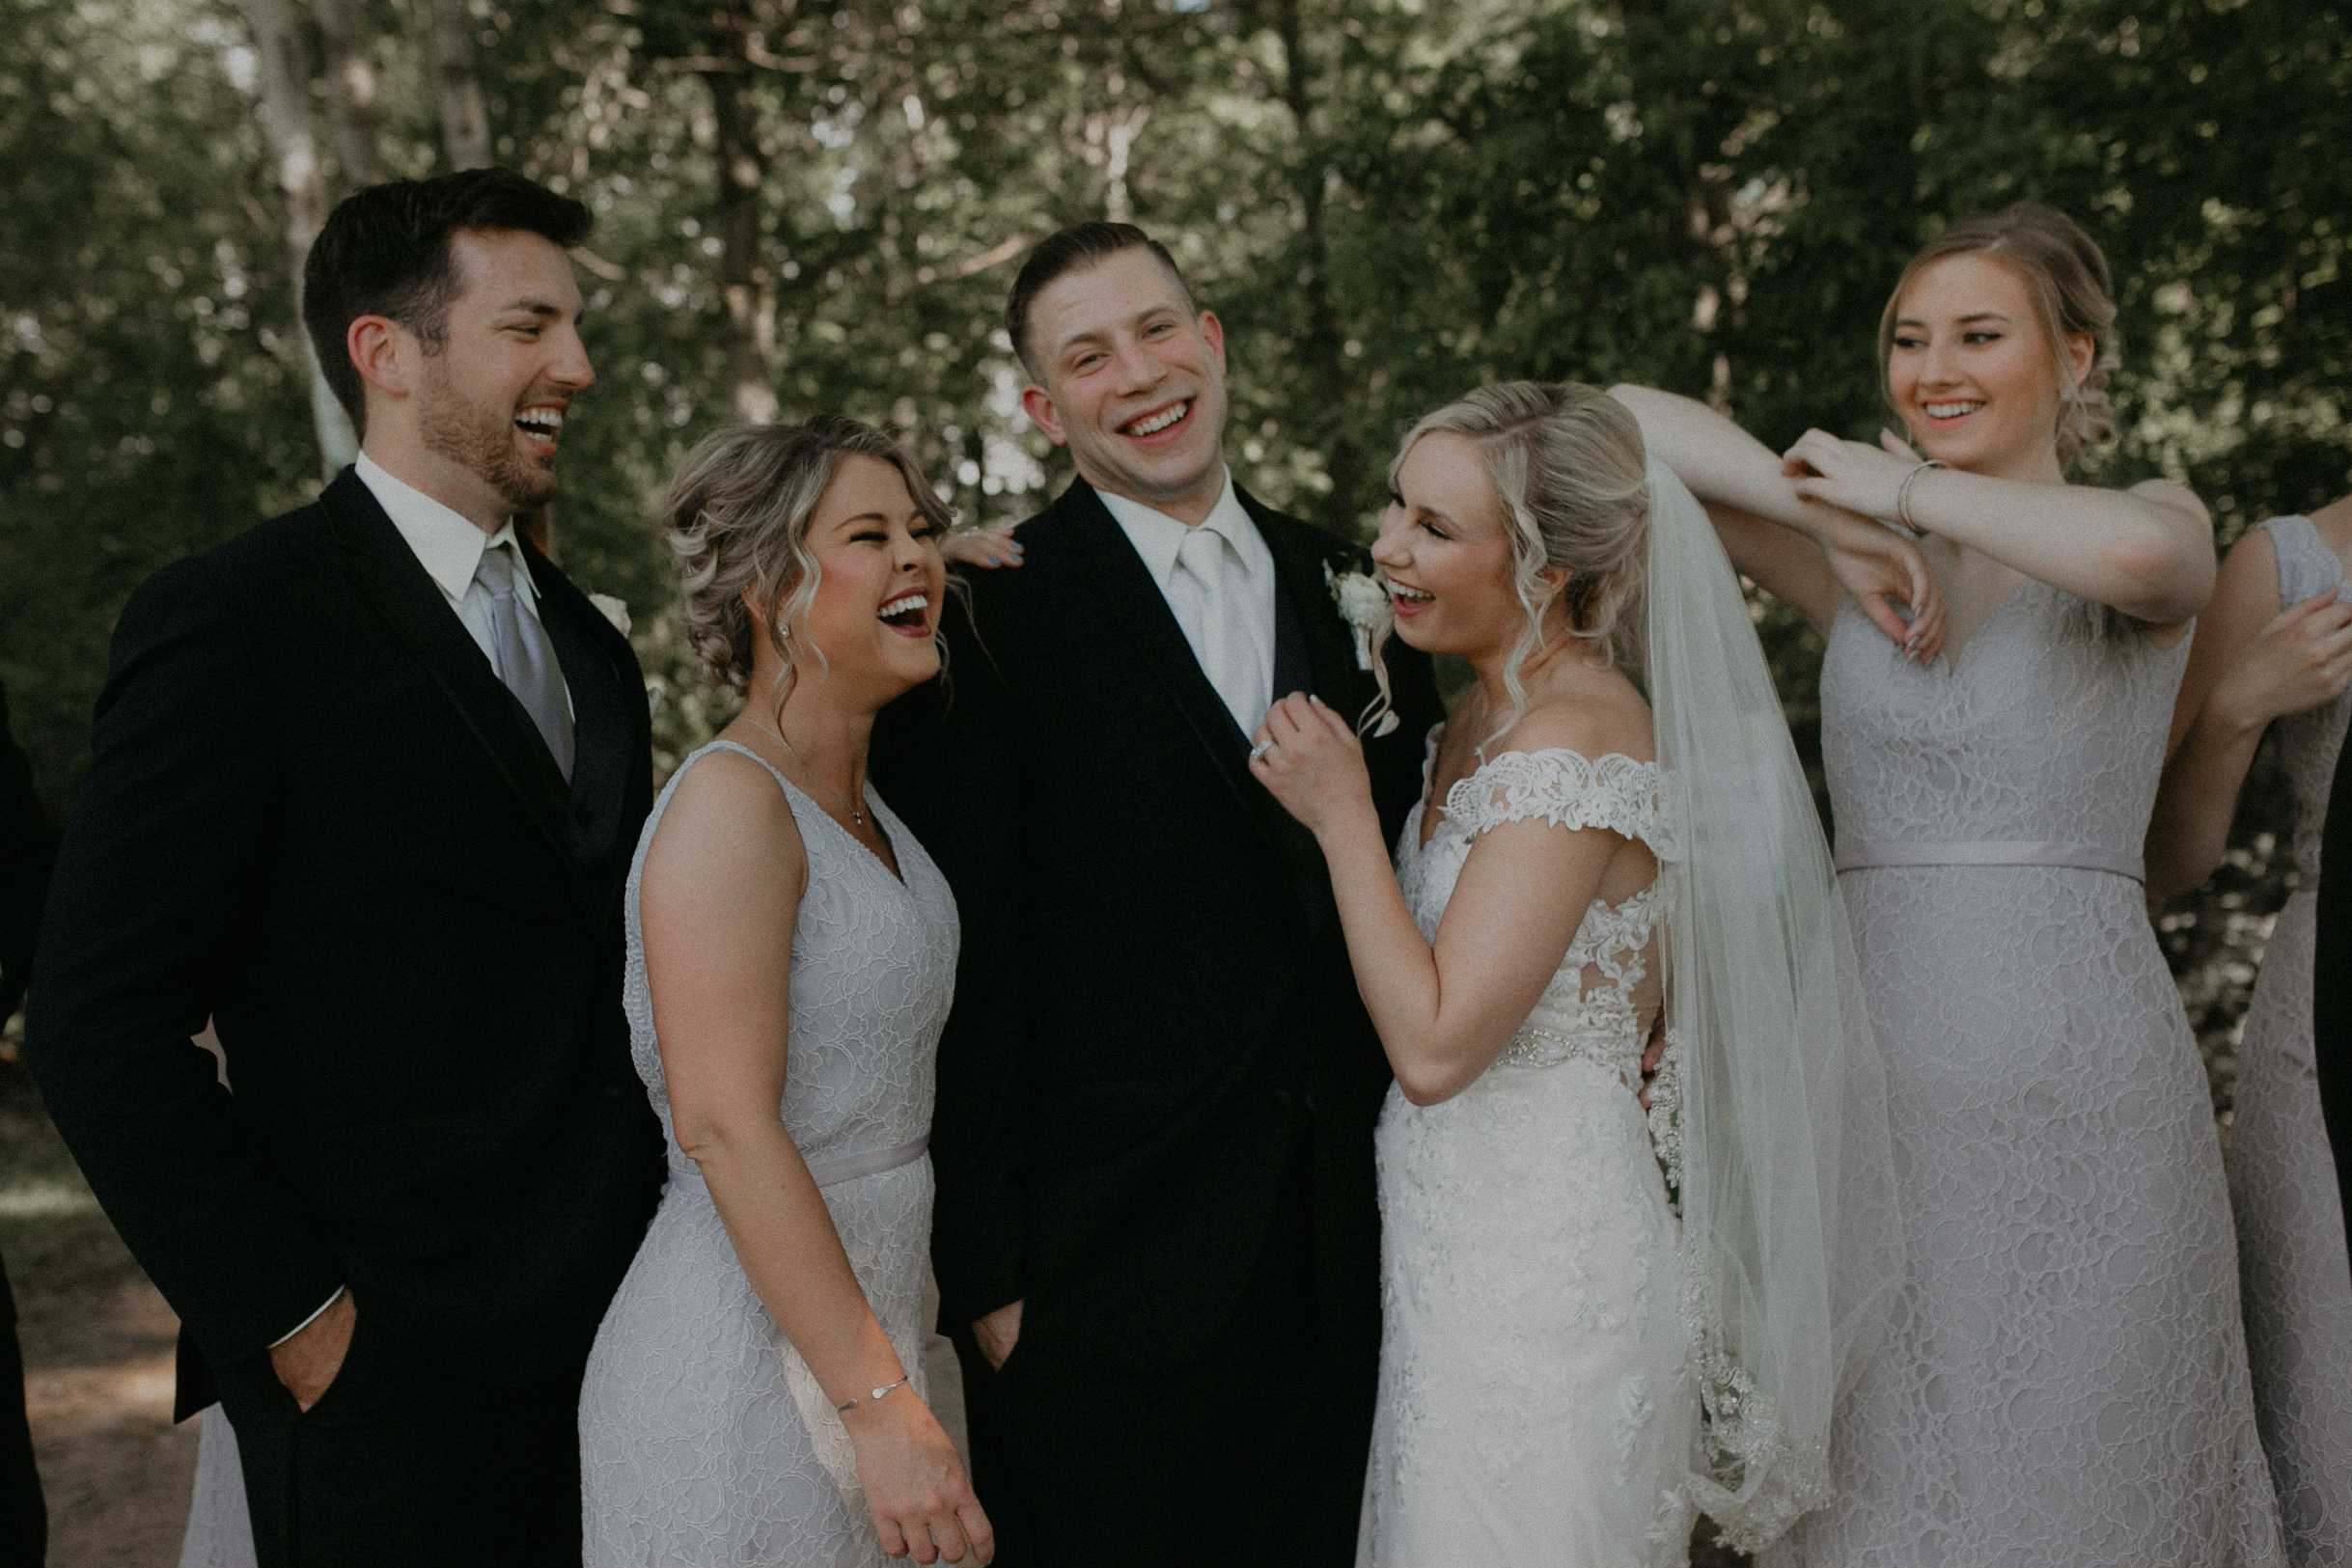  Andrea Wagner Photography captures real and authentic moments of the bridal party at RiverEdge Golf Club in Marshfield Wi 